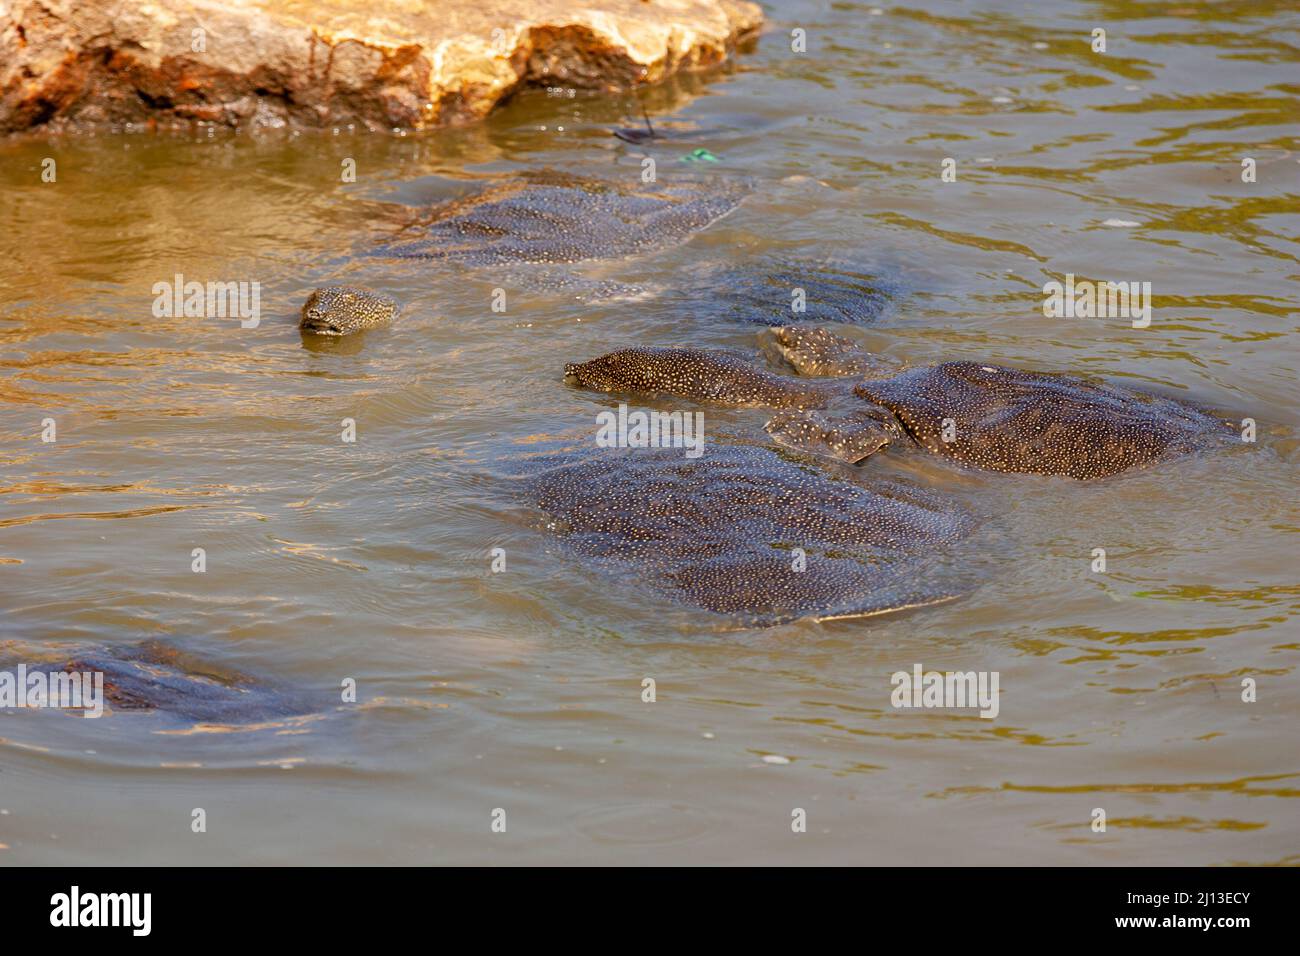 African softshell turtle (Trionyx triunguis). This species inhabits fresh water and brackish habitats in Africa (larger parts of East, West and Middle Stock Photo